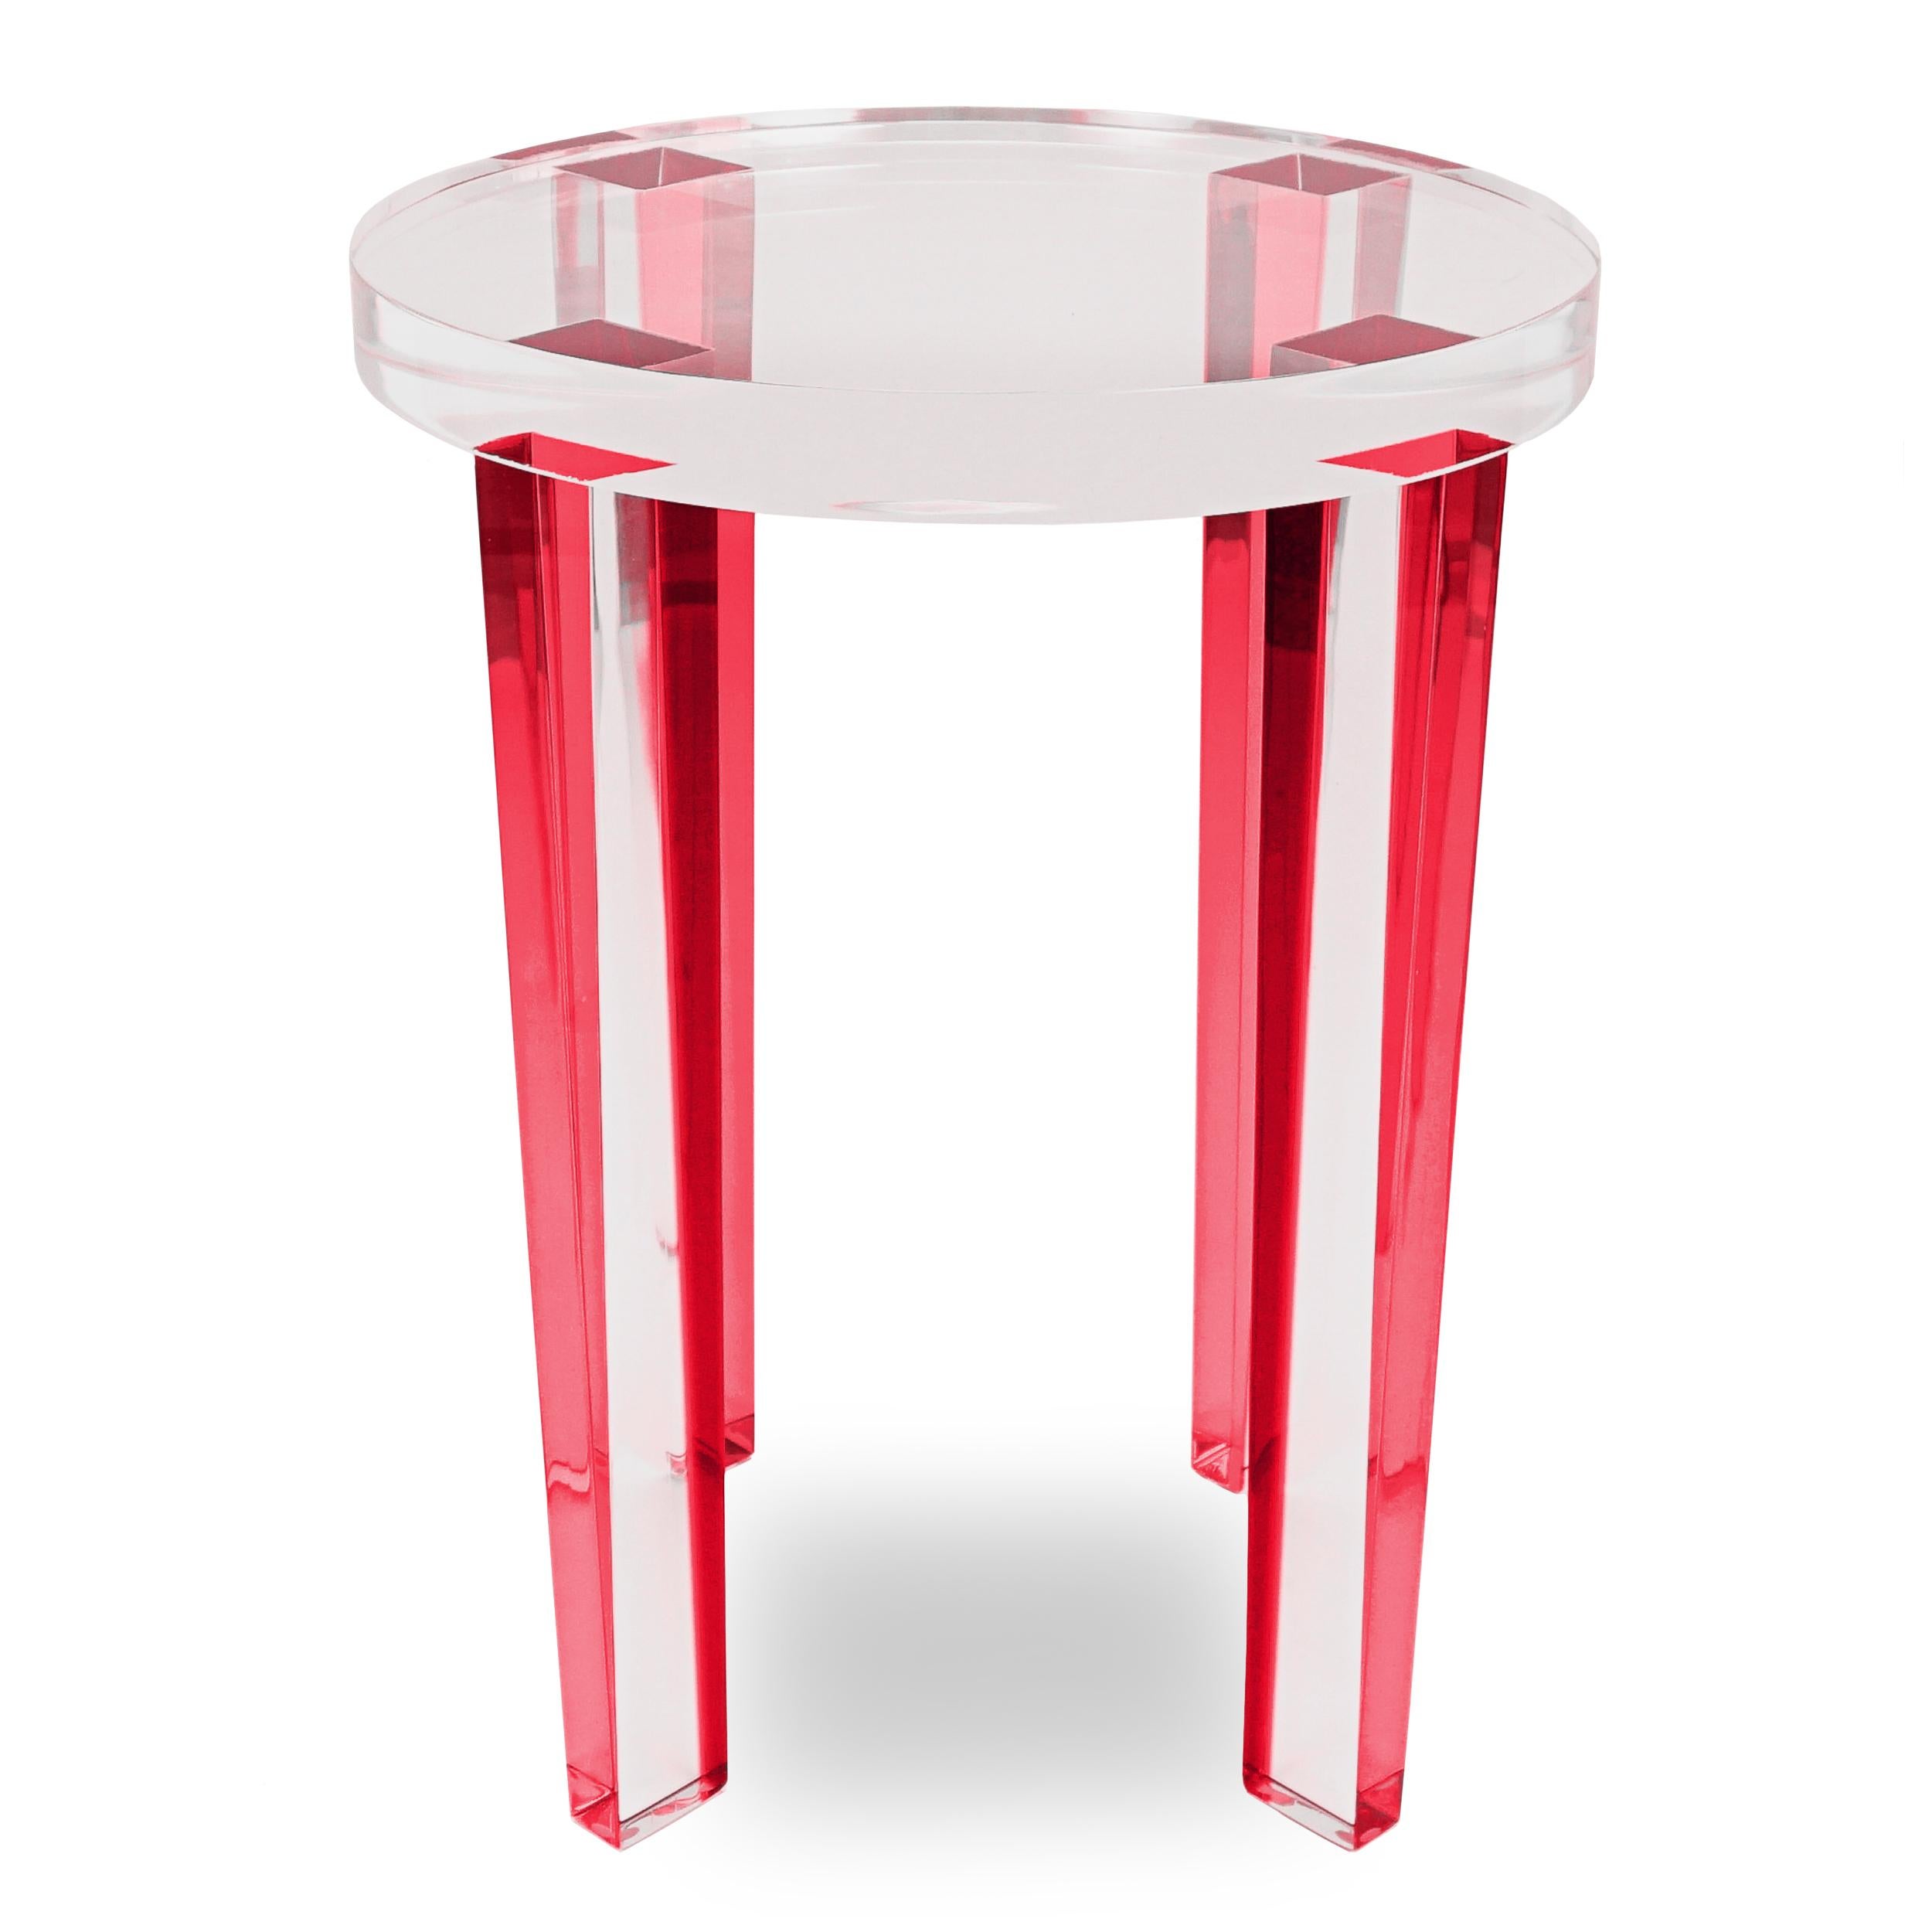 This round lucite side table has been built with red colored Lucite legs and a clear Lucite top. This little side table will reflect light and create a big impact.

Overall: 15”Dia. x 19”H

Price As Shown: $1,850 each

2023 - Available Right Now